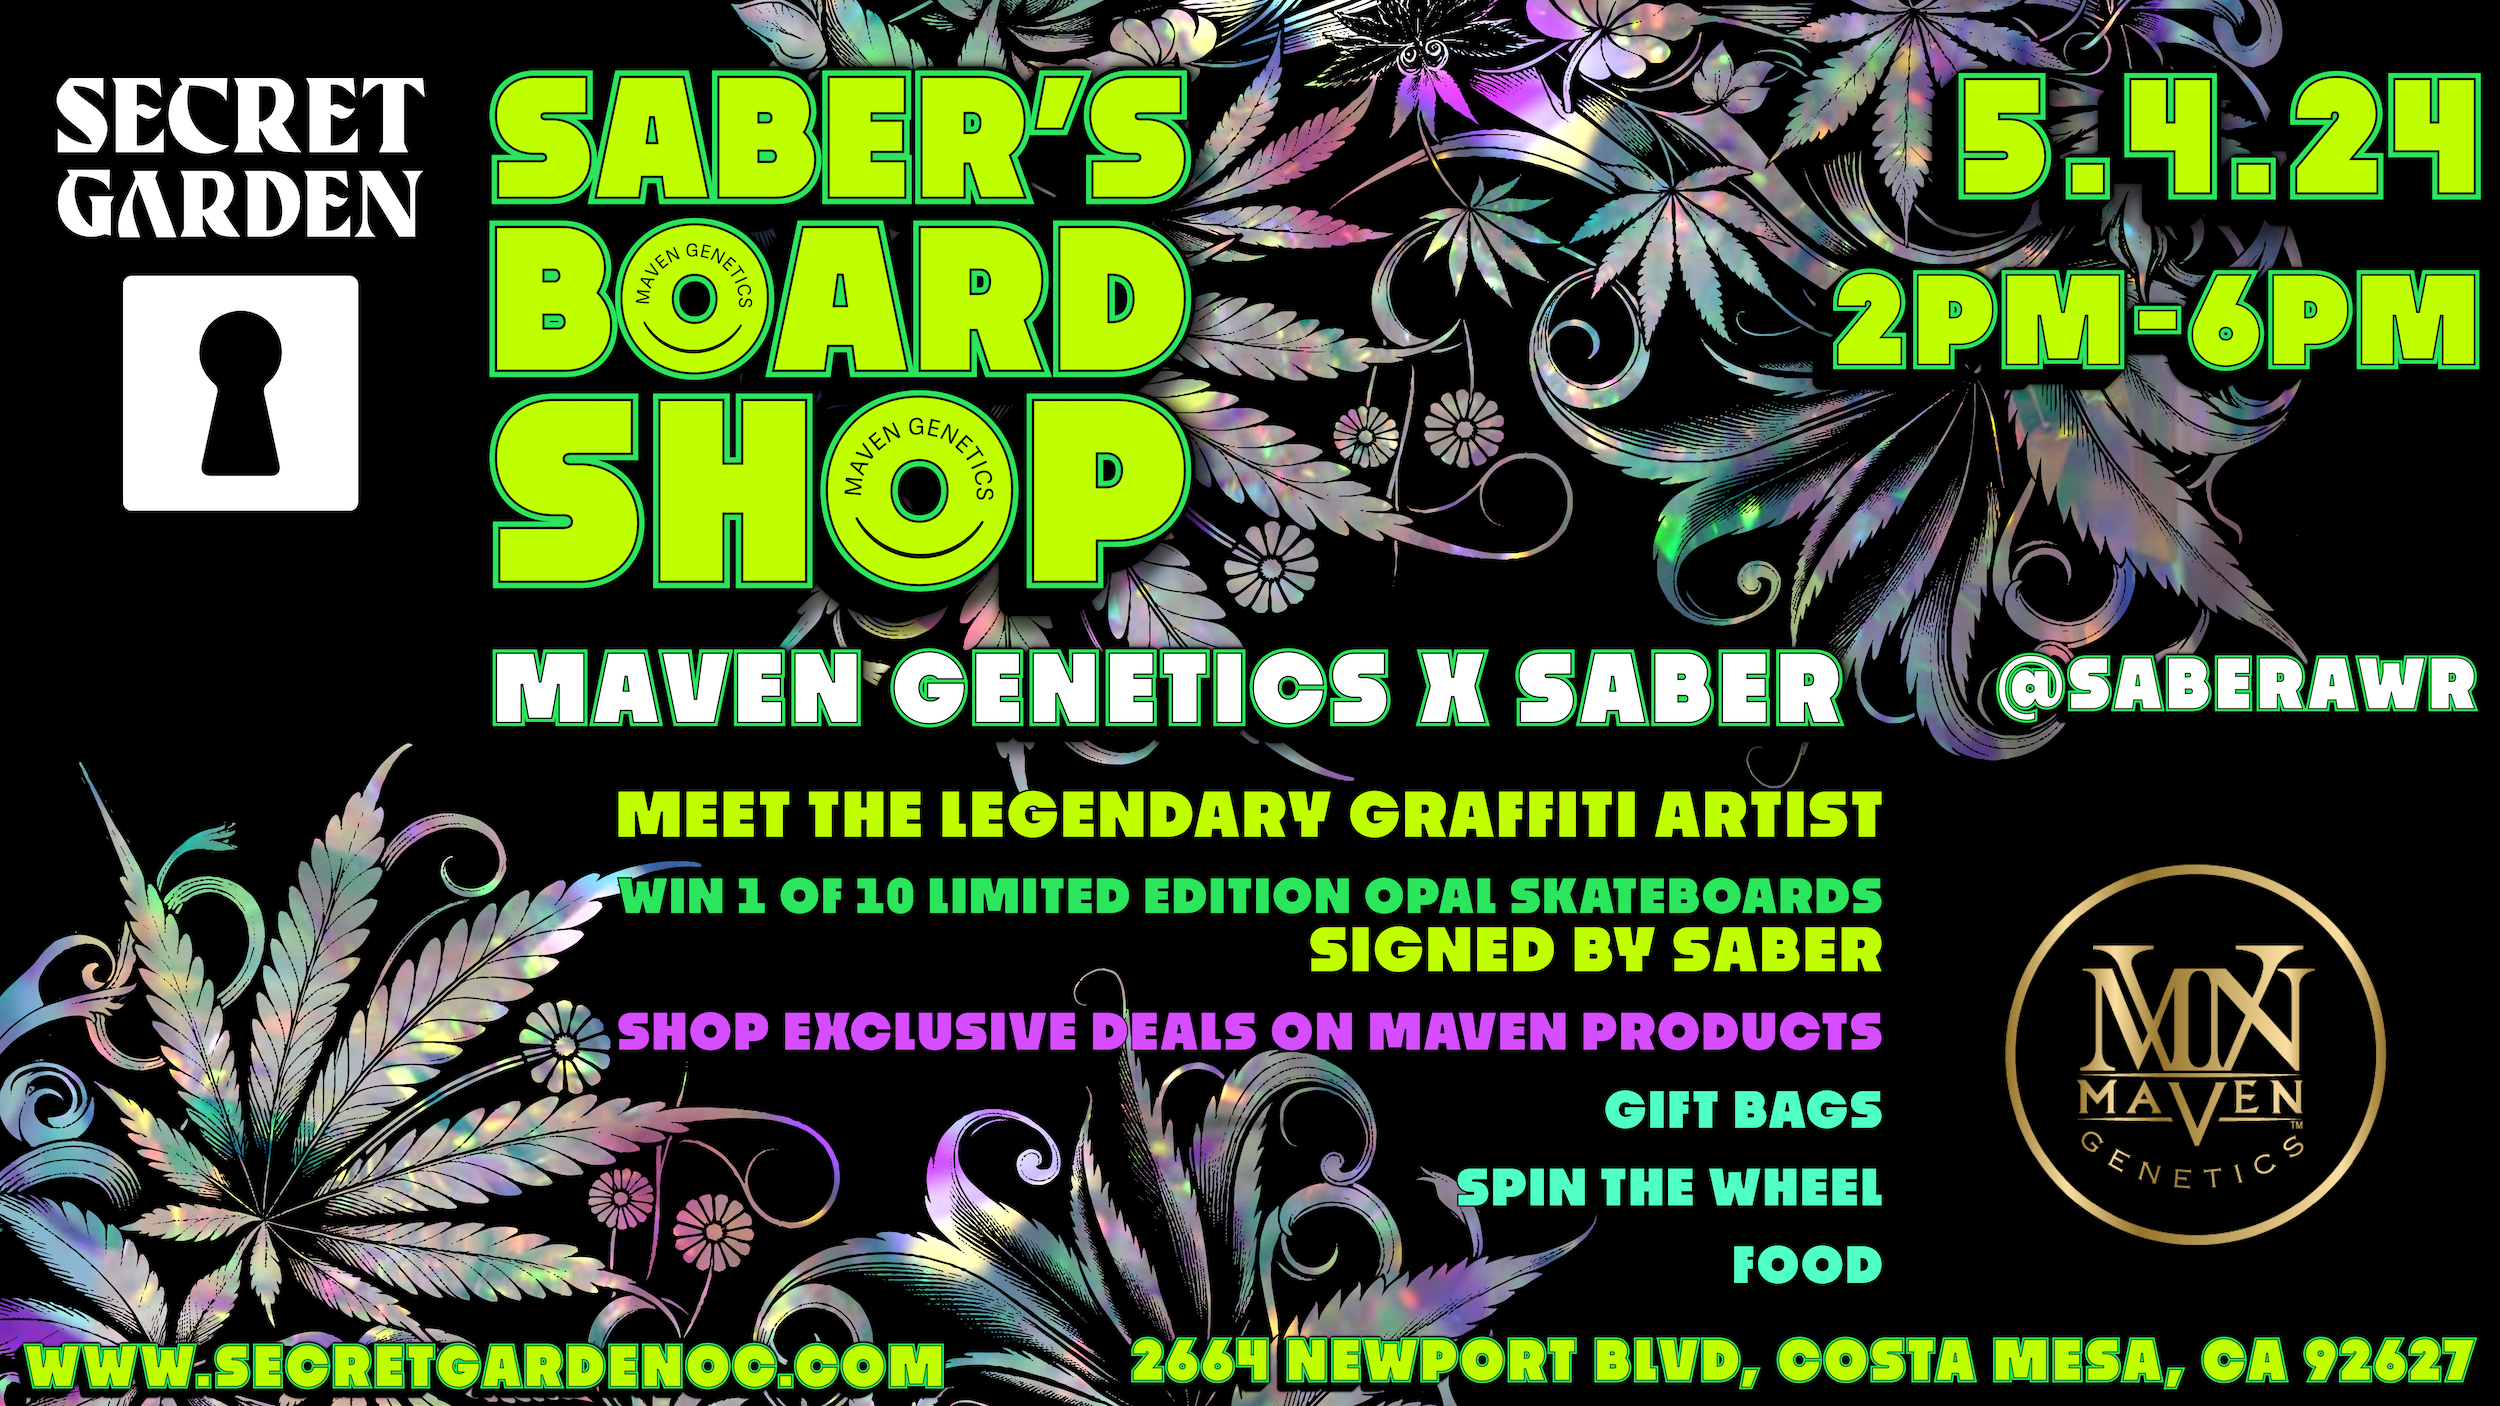 A flyer detailing a May 4th event with Maven, Saber, and Secret Garden